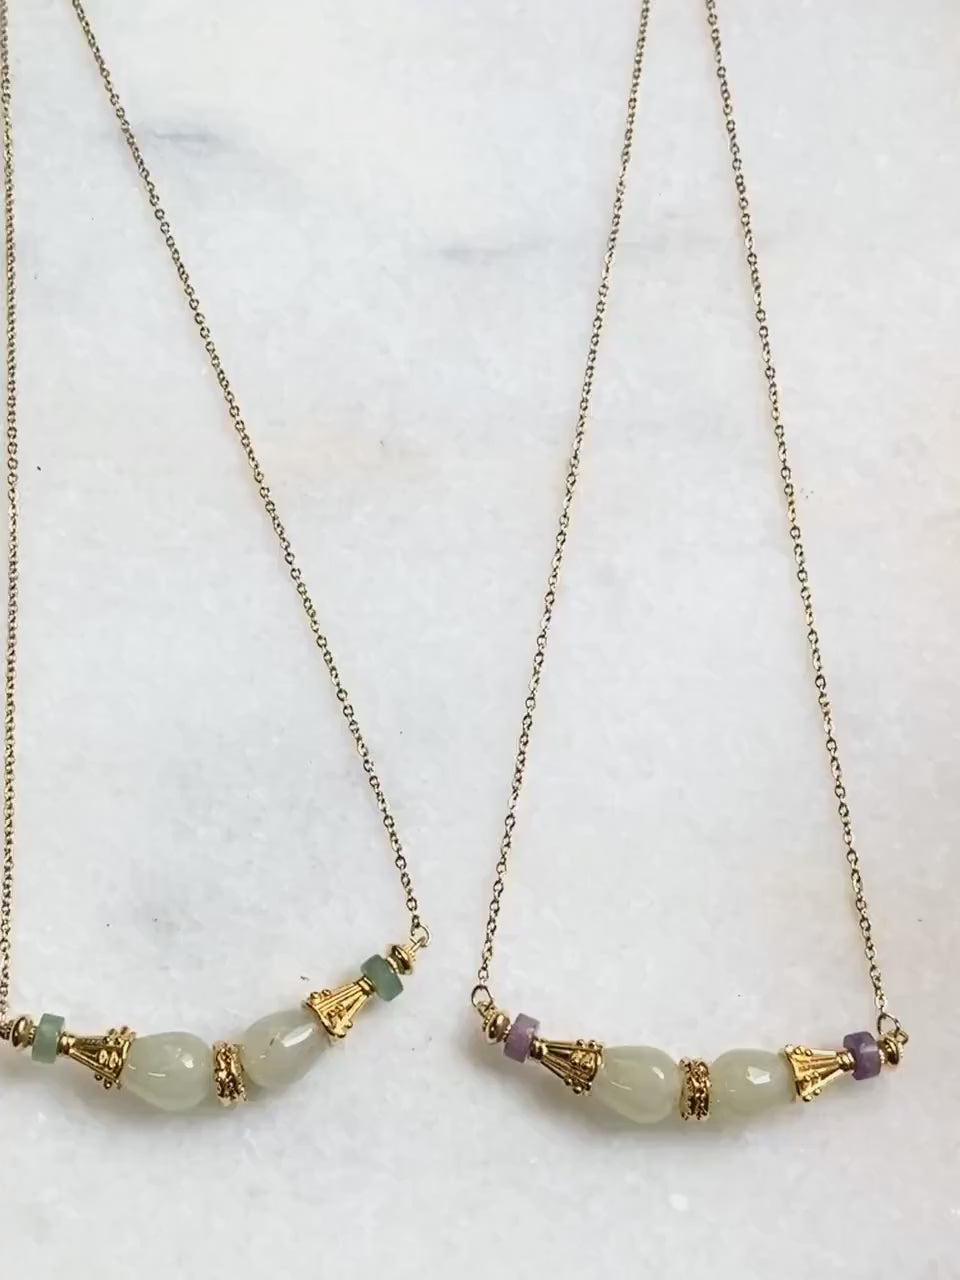 Mum Gift Dainty Gems Necklace Agate Aventurine Amethyst Necklace Minimalist Necklace Gold Chain Pendant Necklace Valentines gift